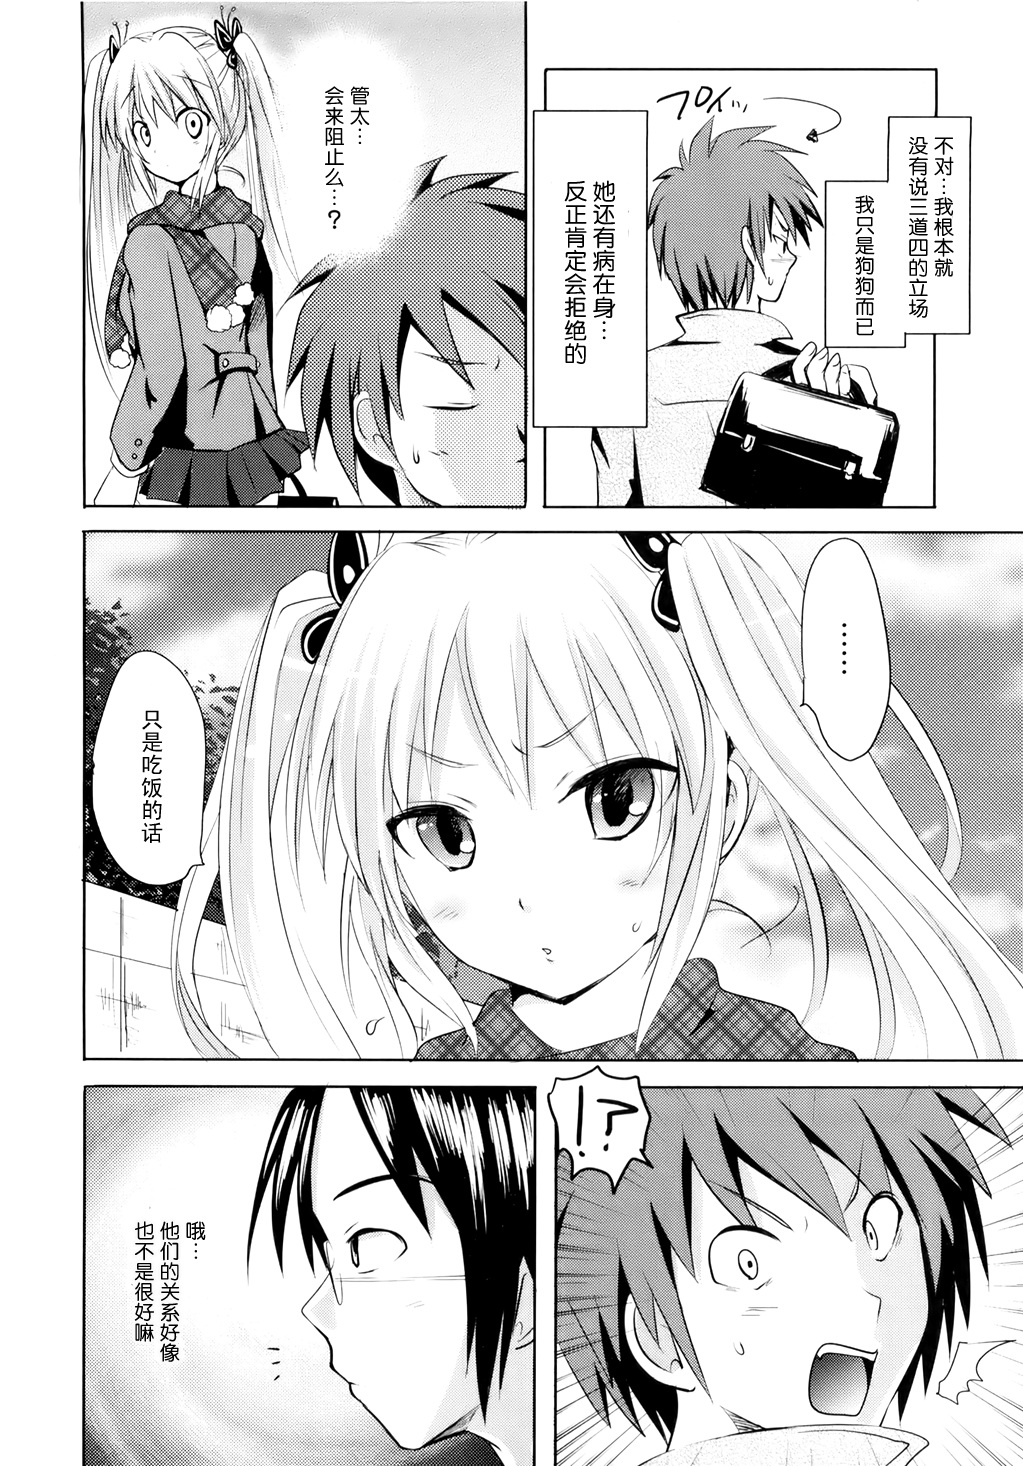 [Natsume Fumika] Sundere! Ch.9 [Chinese] [夏目文花] スンデレ! CH9 [中文翻譯]